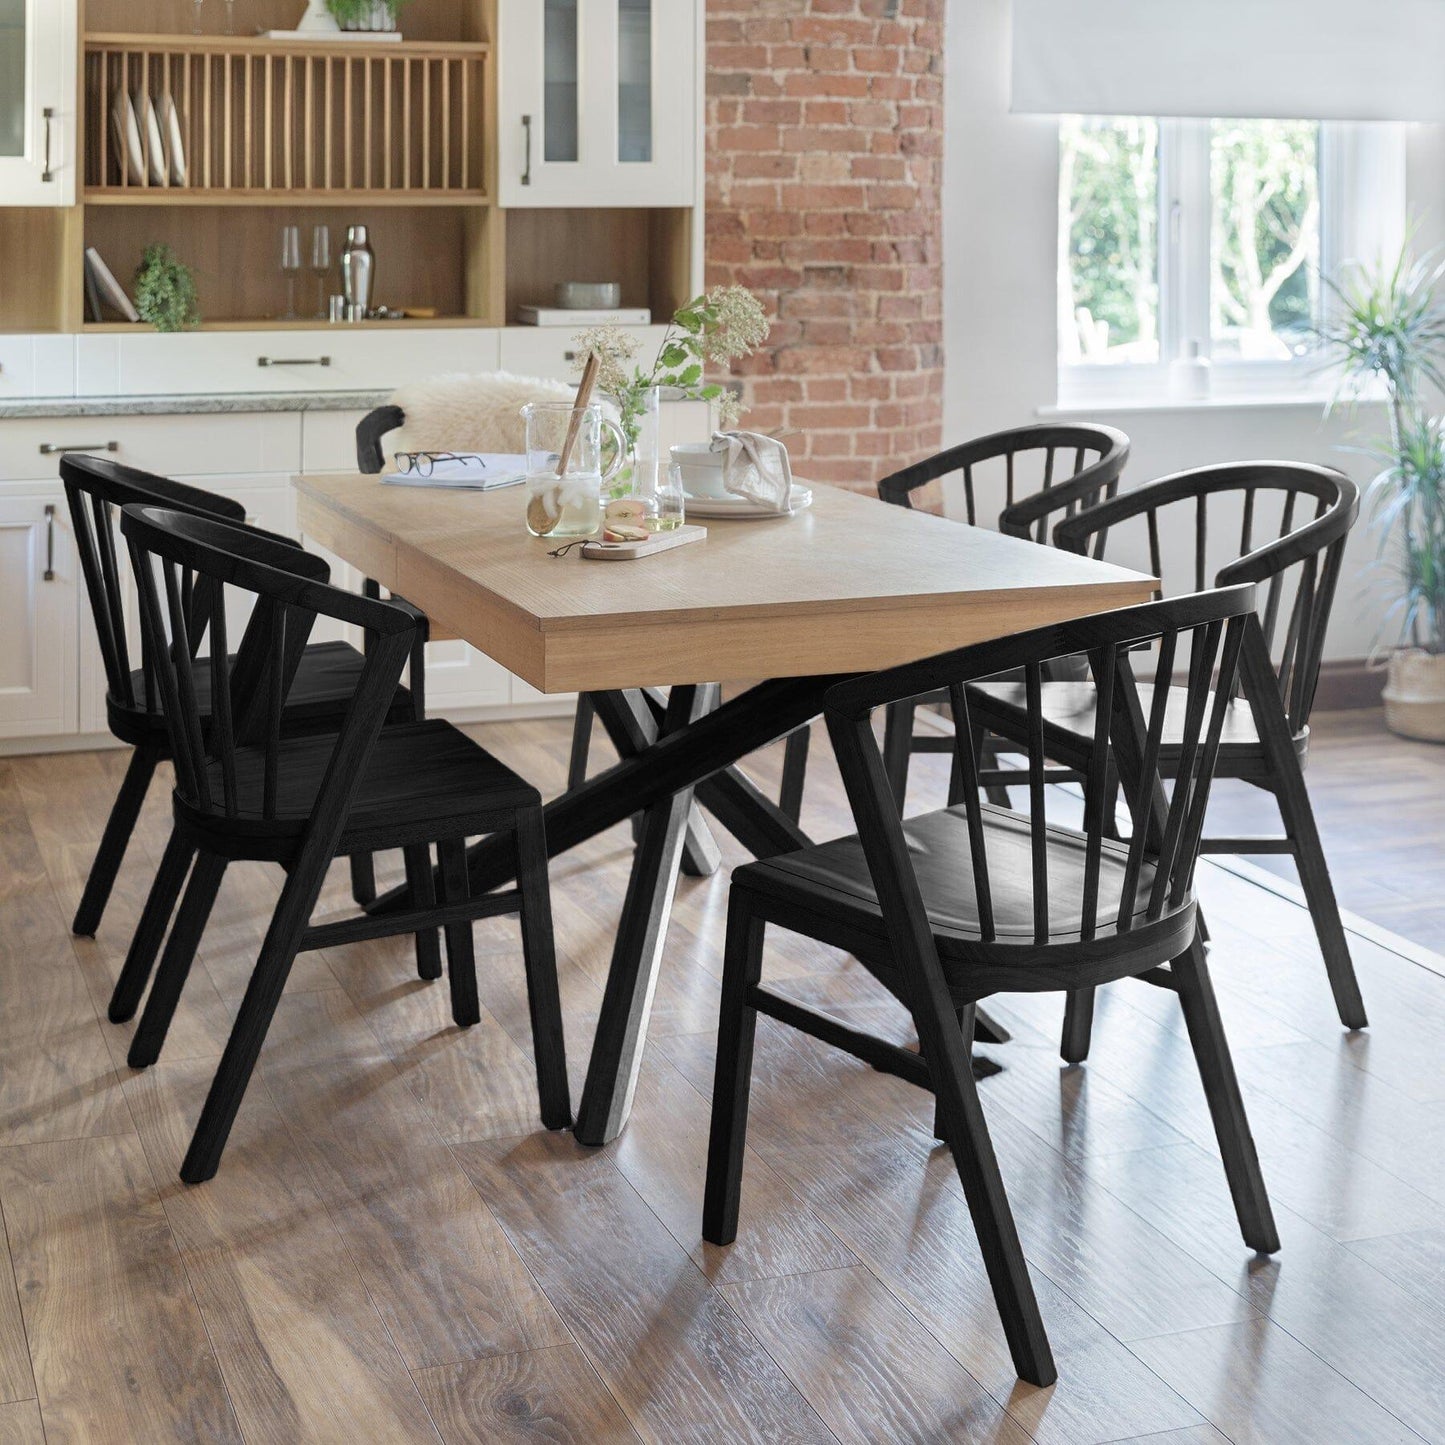 Amelia Whitewash Extendable Dining Table Set - 6 Seater - Black Spindle Back Chairs - Black Legs